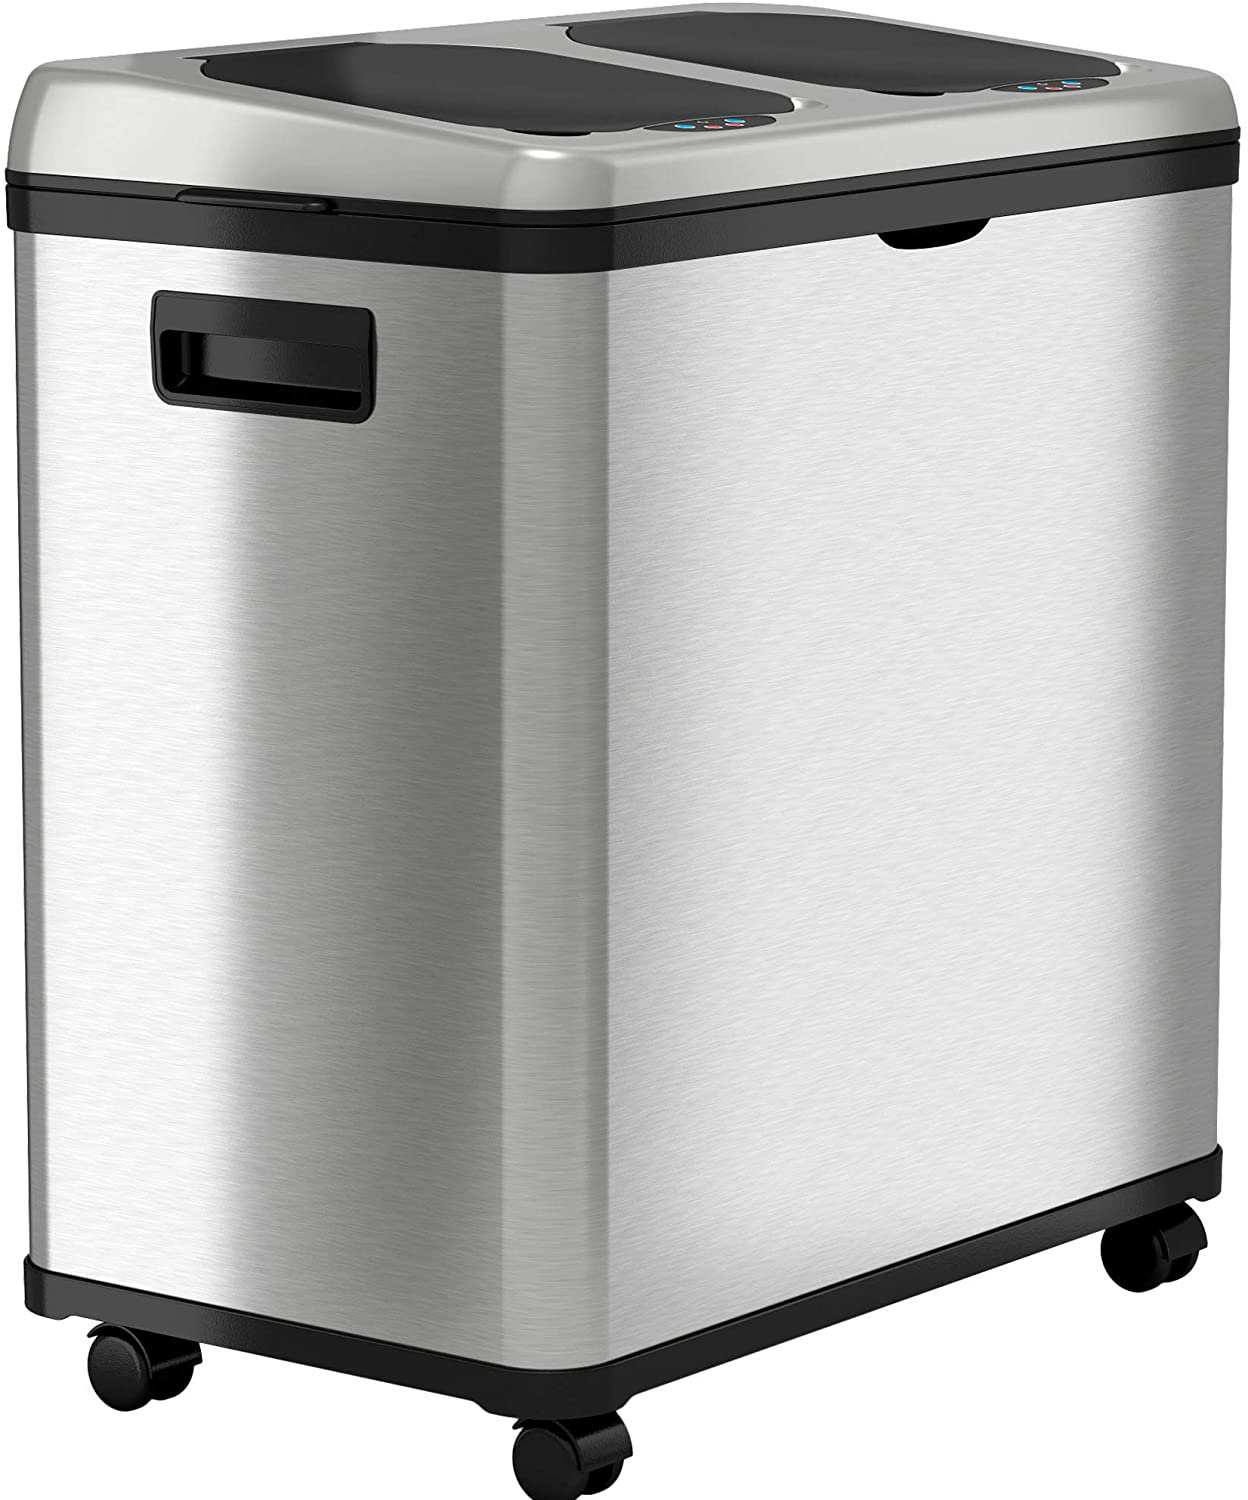 Dual Compartment Tall Trash Can and Recycling Bin with Lid 16-Gallon Capacity